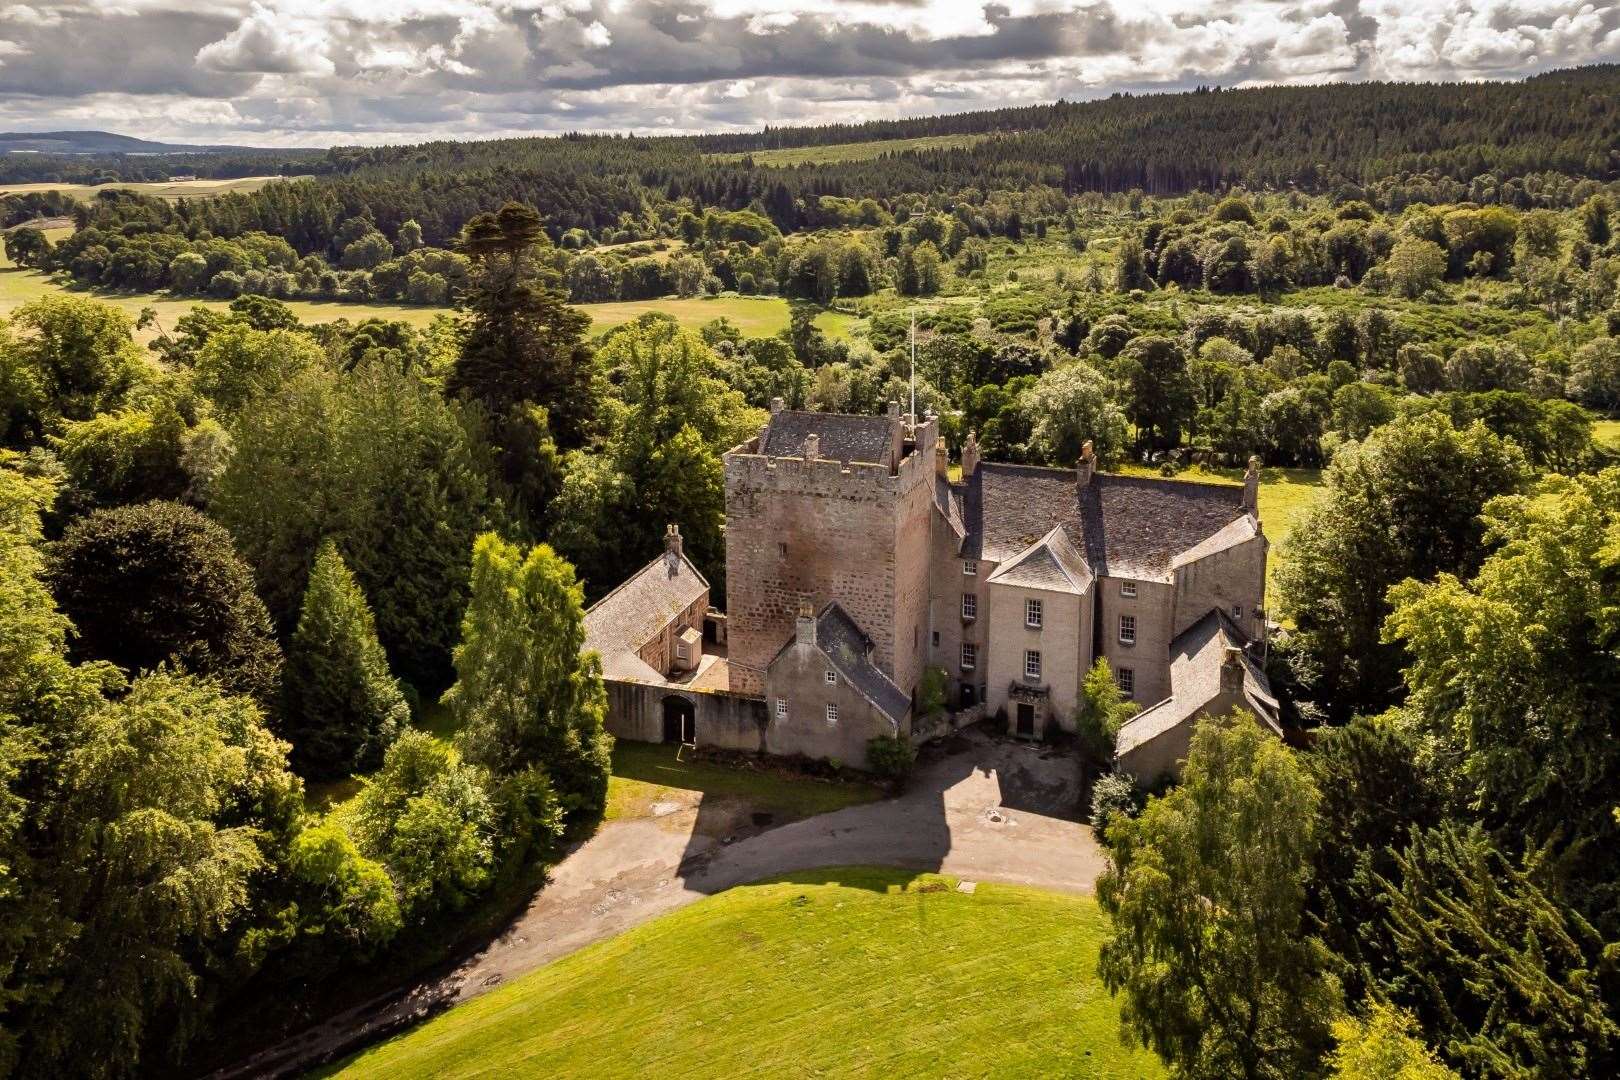 Kilravock Castle, dating back to the 15th century, was placed on the market with a price guide of £4 million.